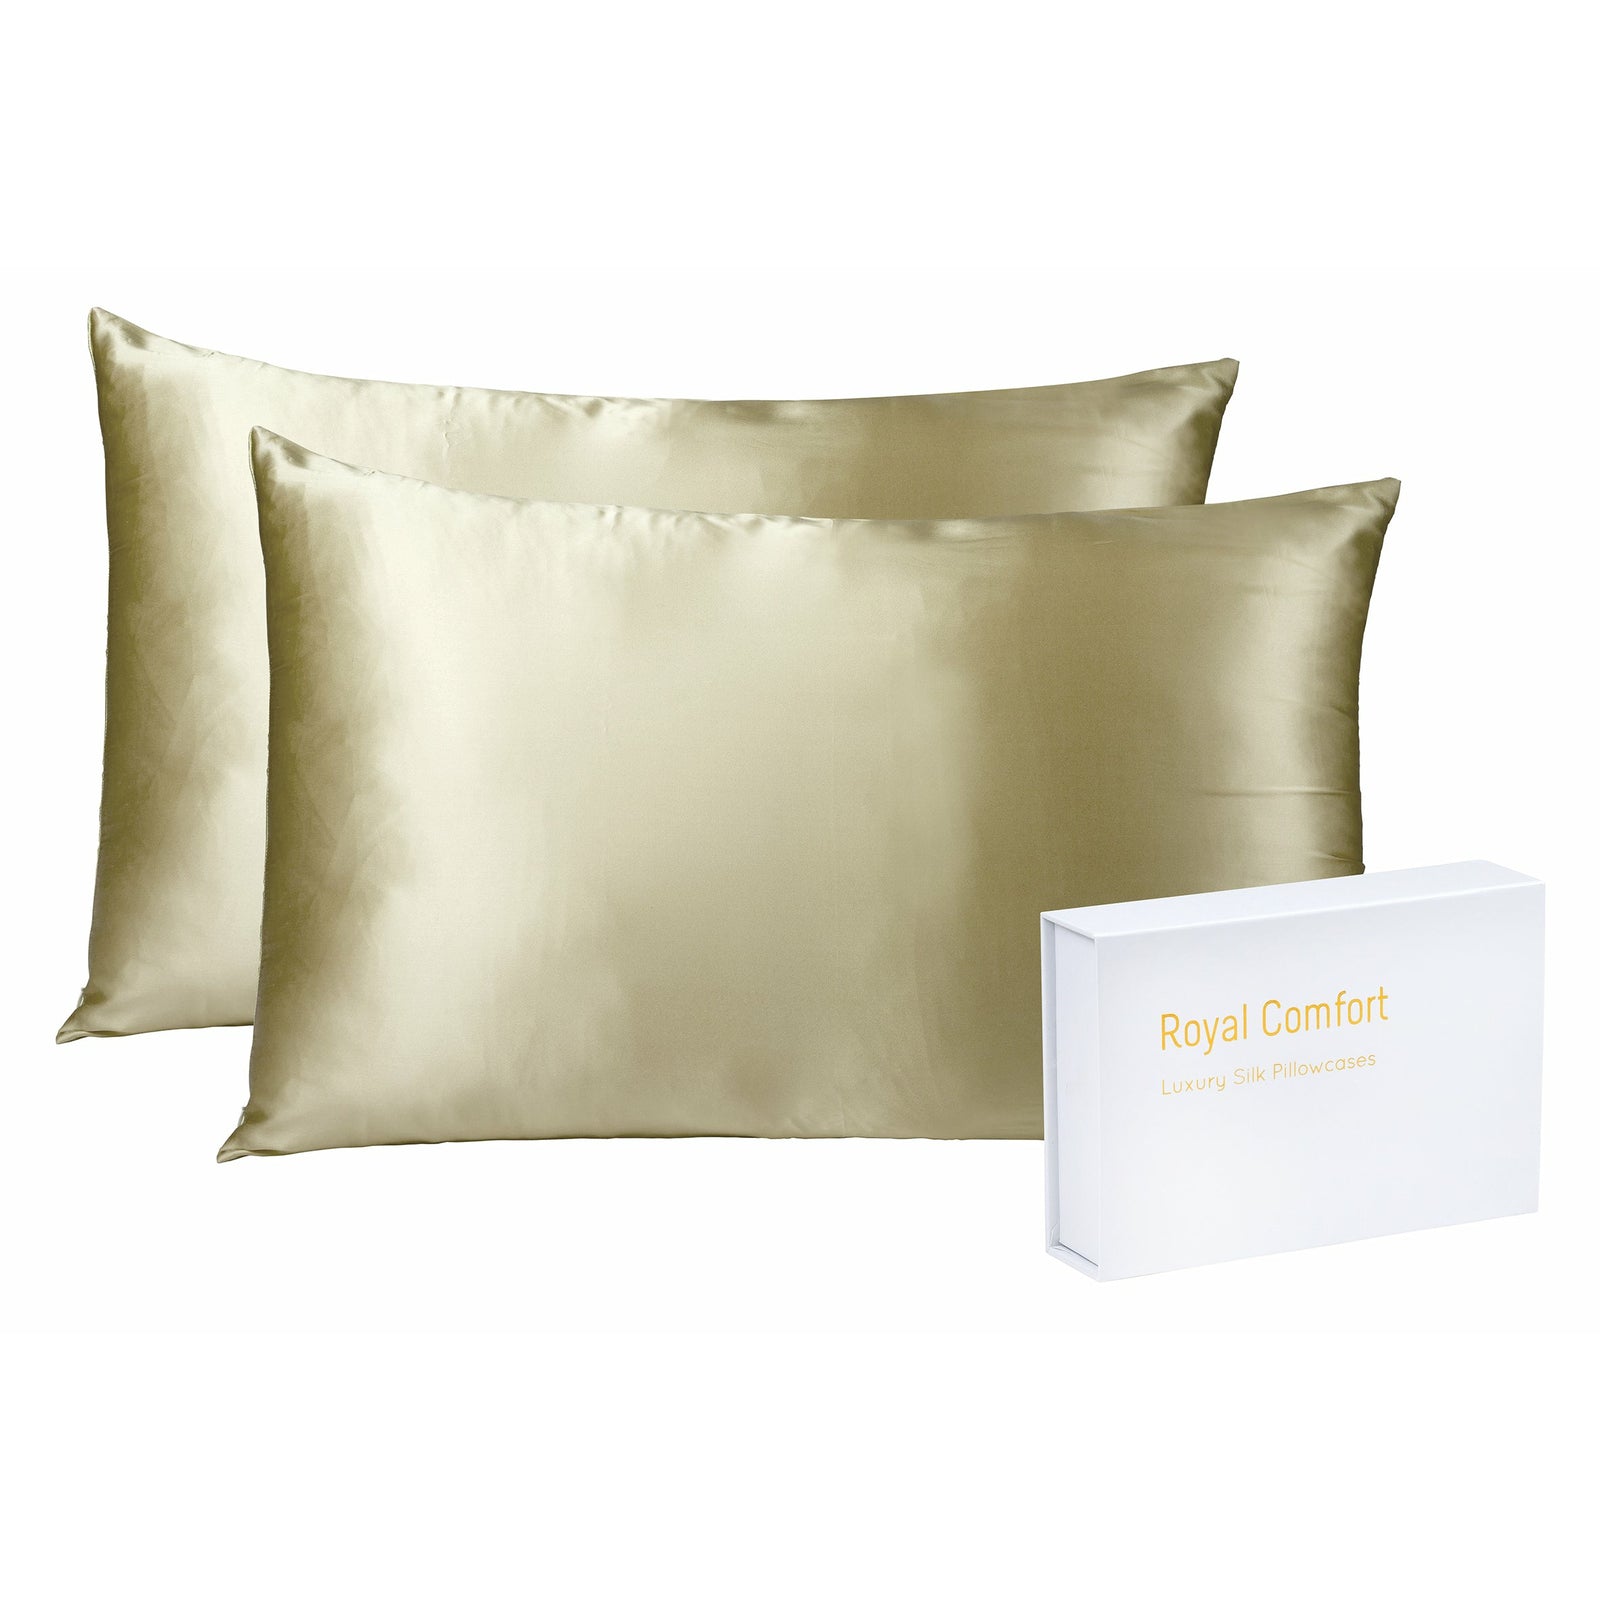 Royal Comfort Mulberry Soft Silk Hypoallergenic Pillowcase Twin Pack 51 x 76cm - Champagne